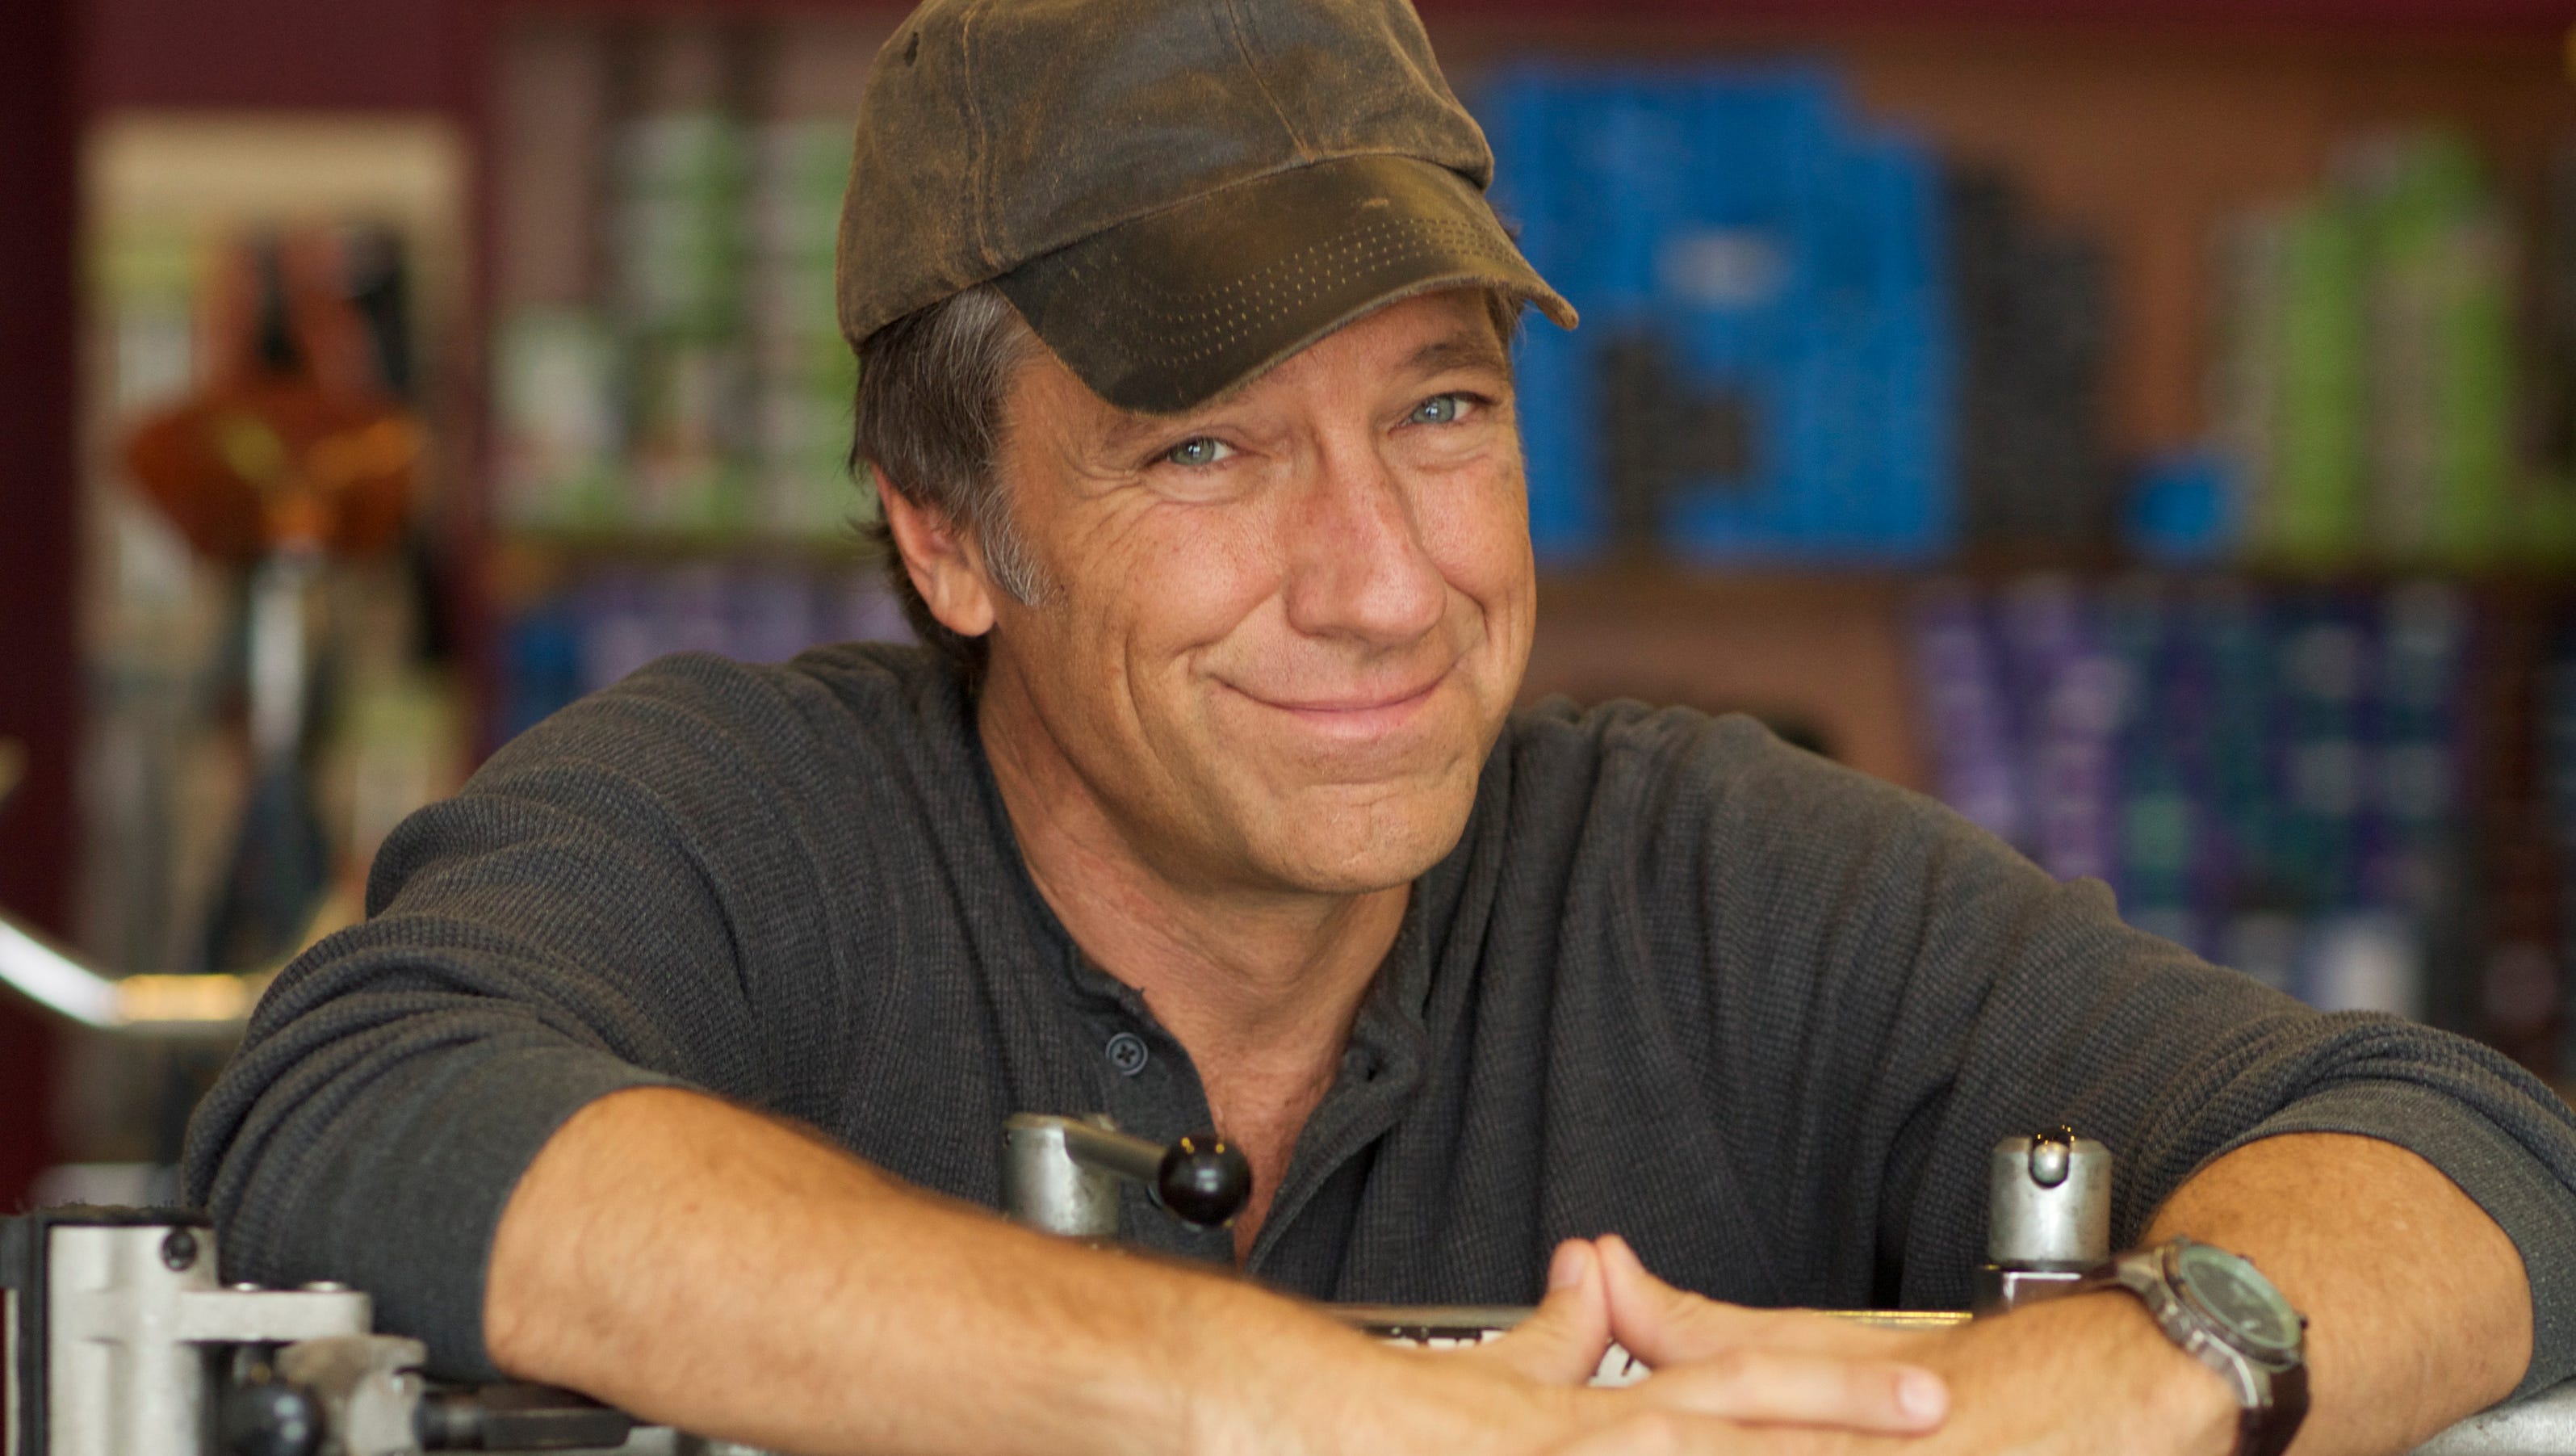 Dirty Jobs host Mike Rowe celebrates American work ethic